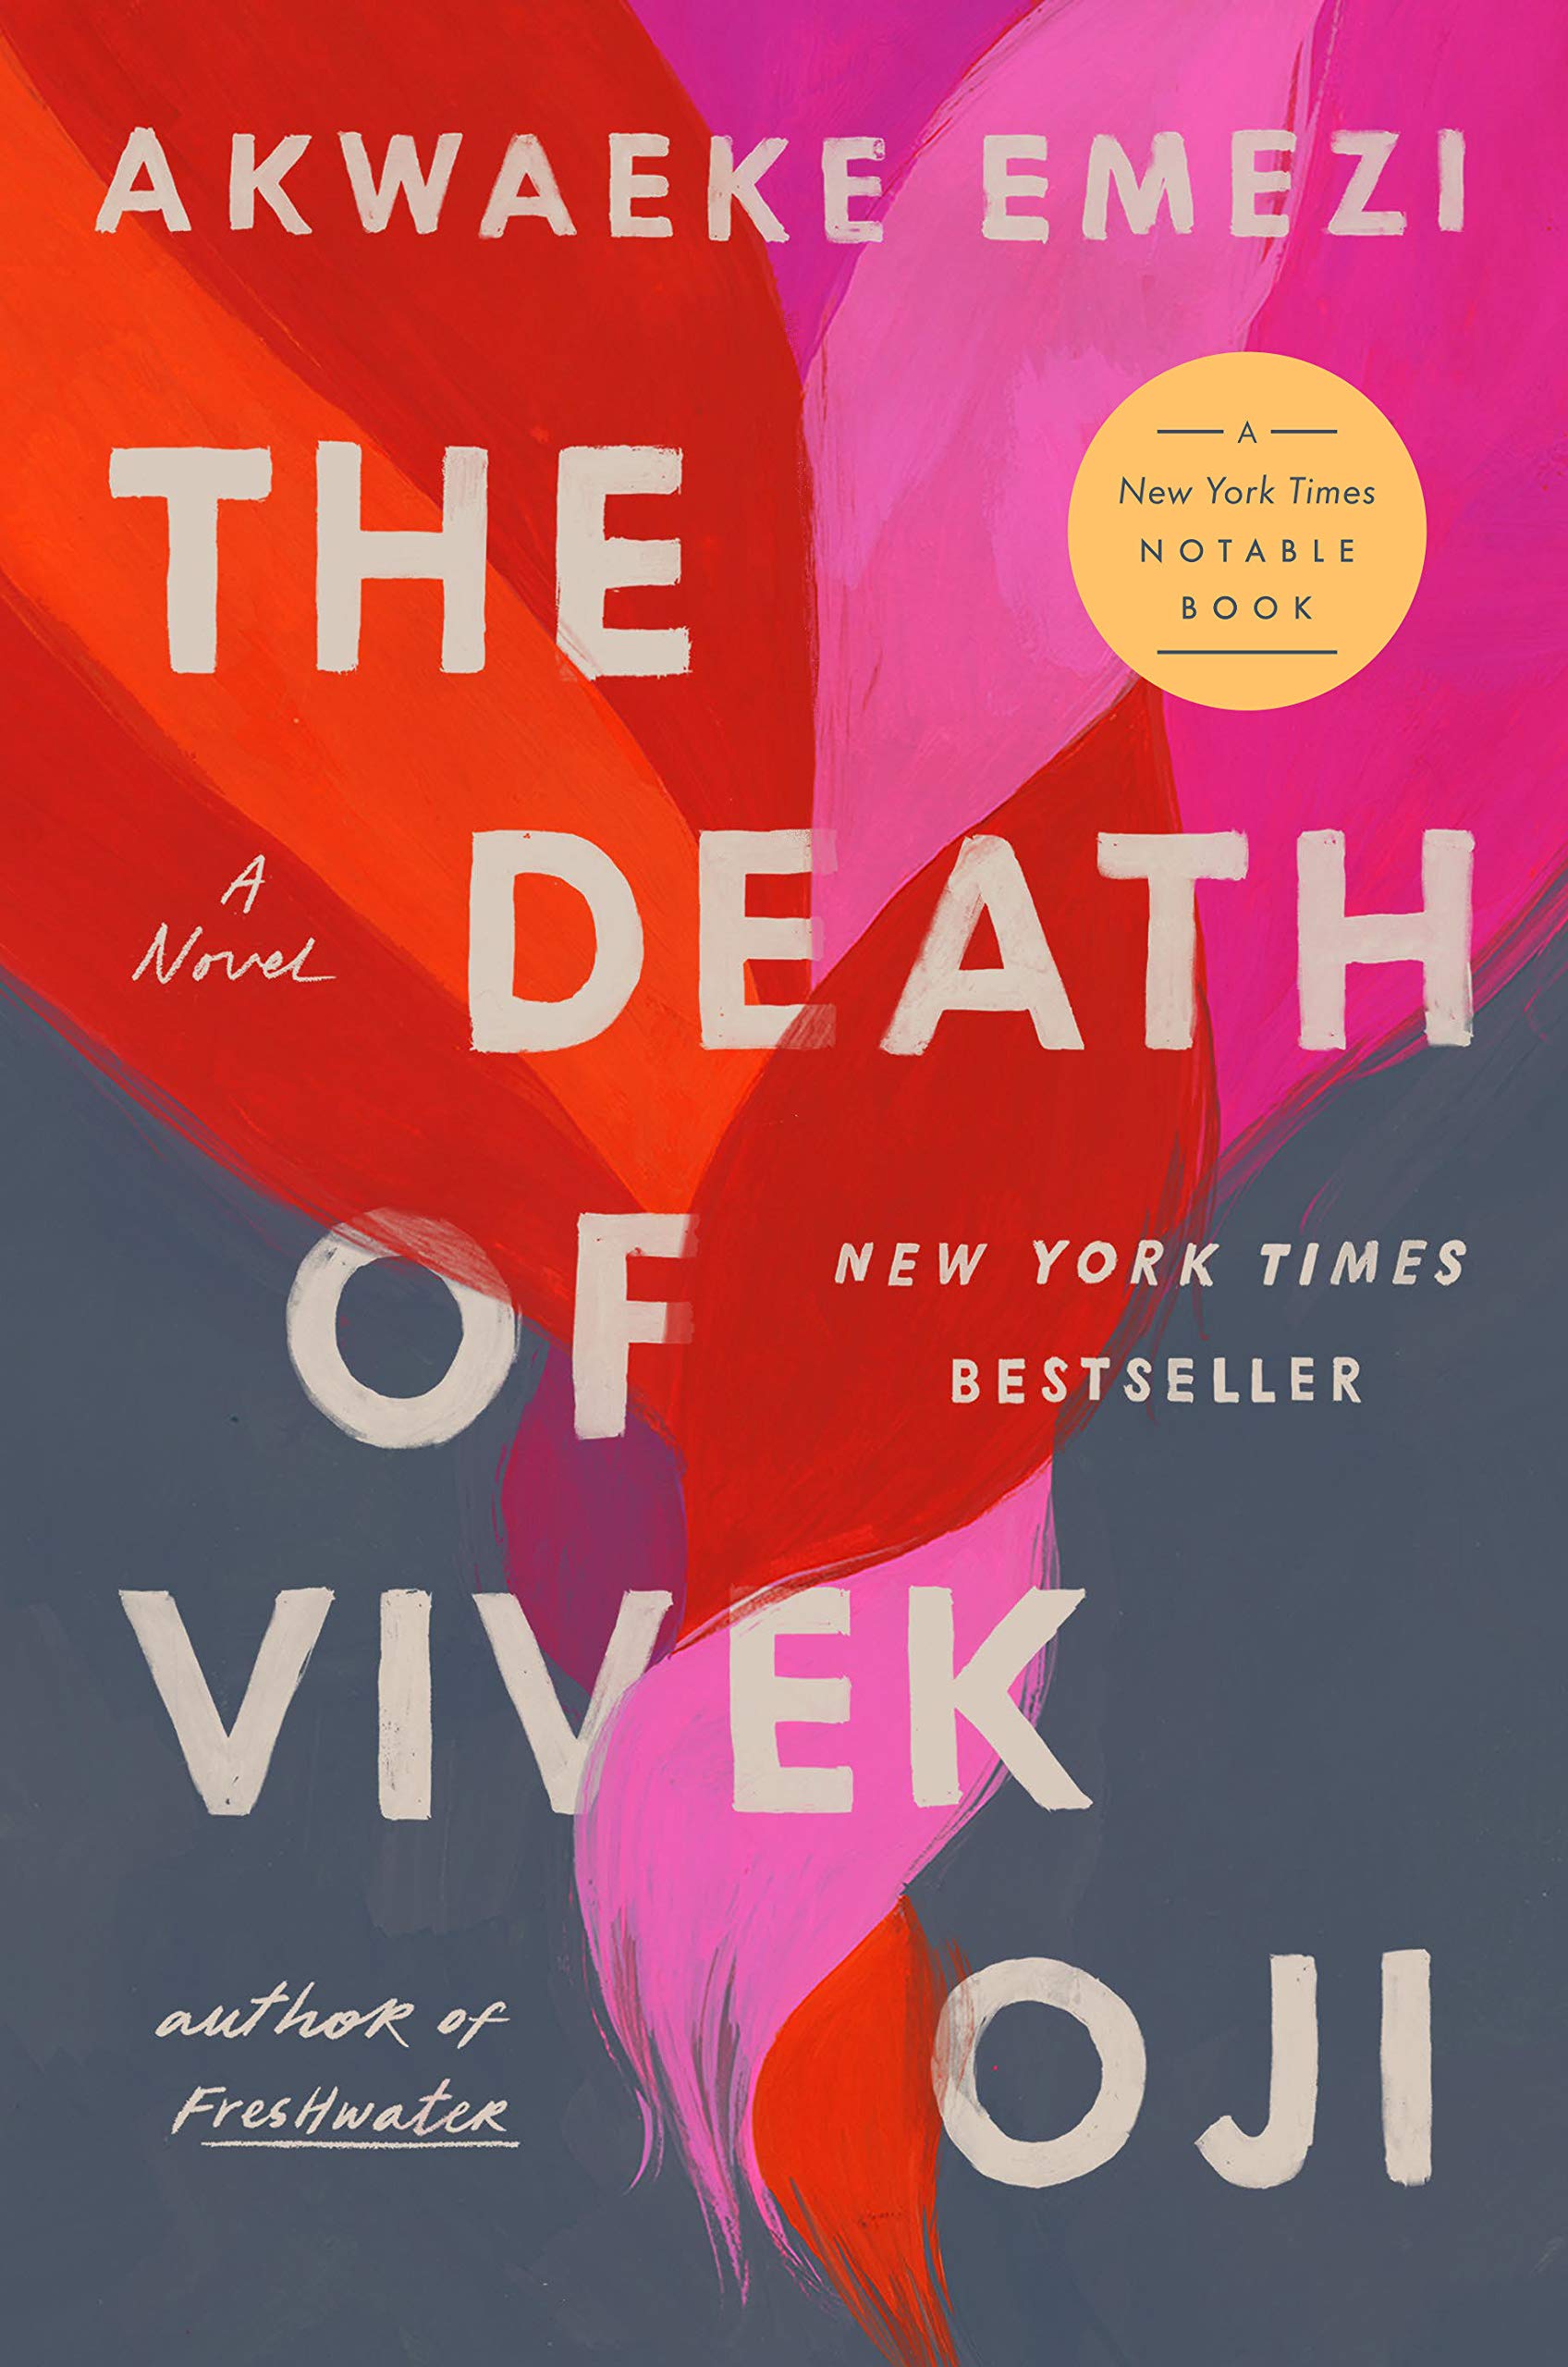 See The Death of Vivek Oji in Library Catalog